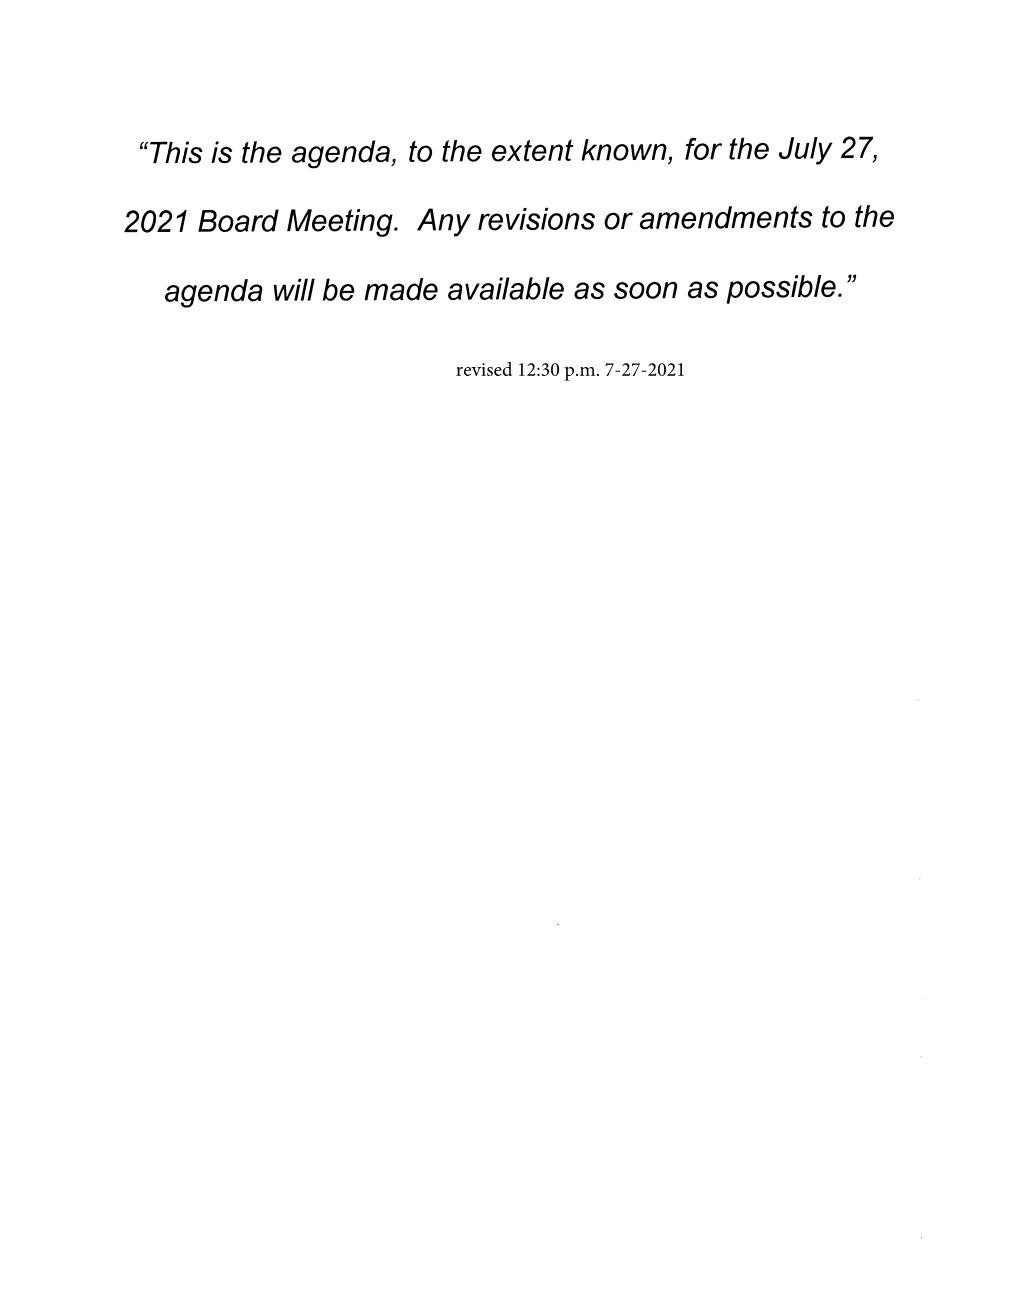 2021 Board Meeting. Any Revisions Or Amendments to The